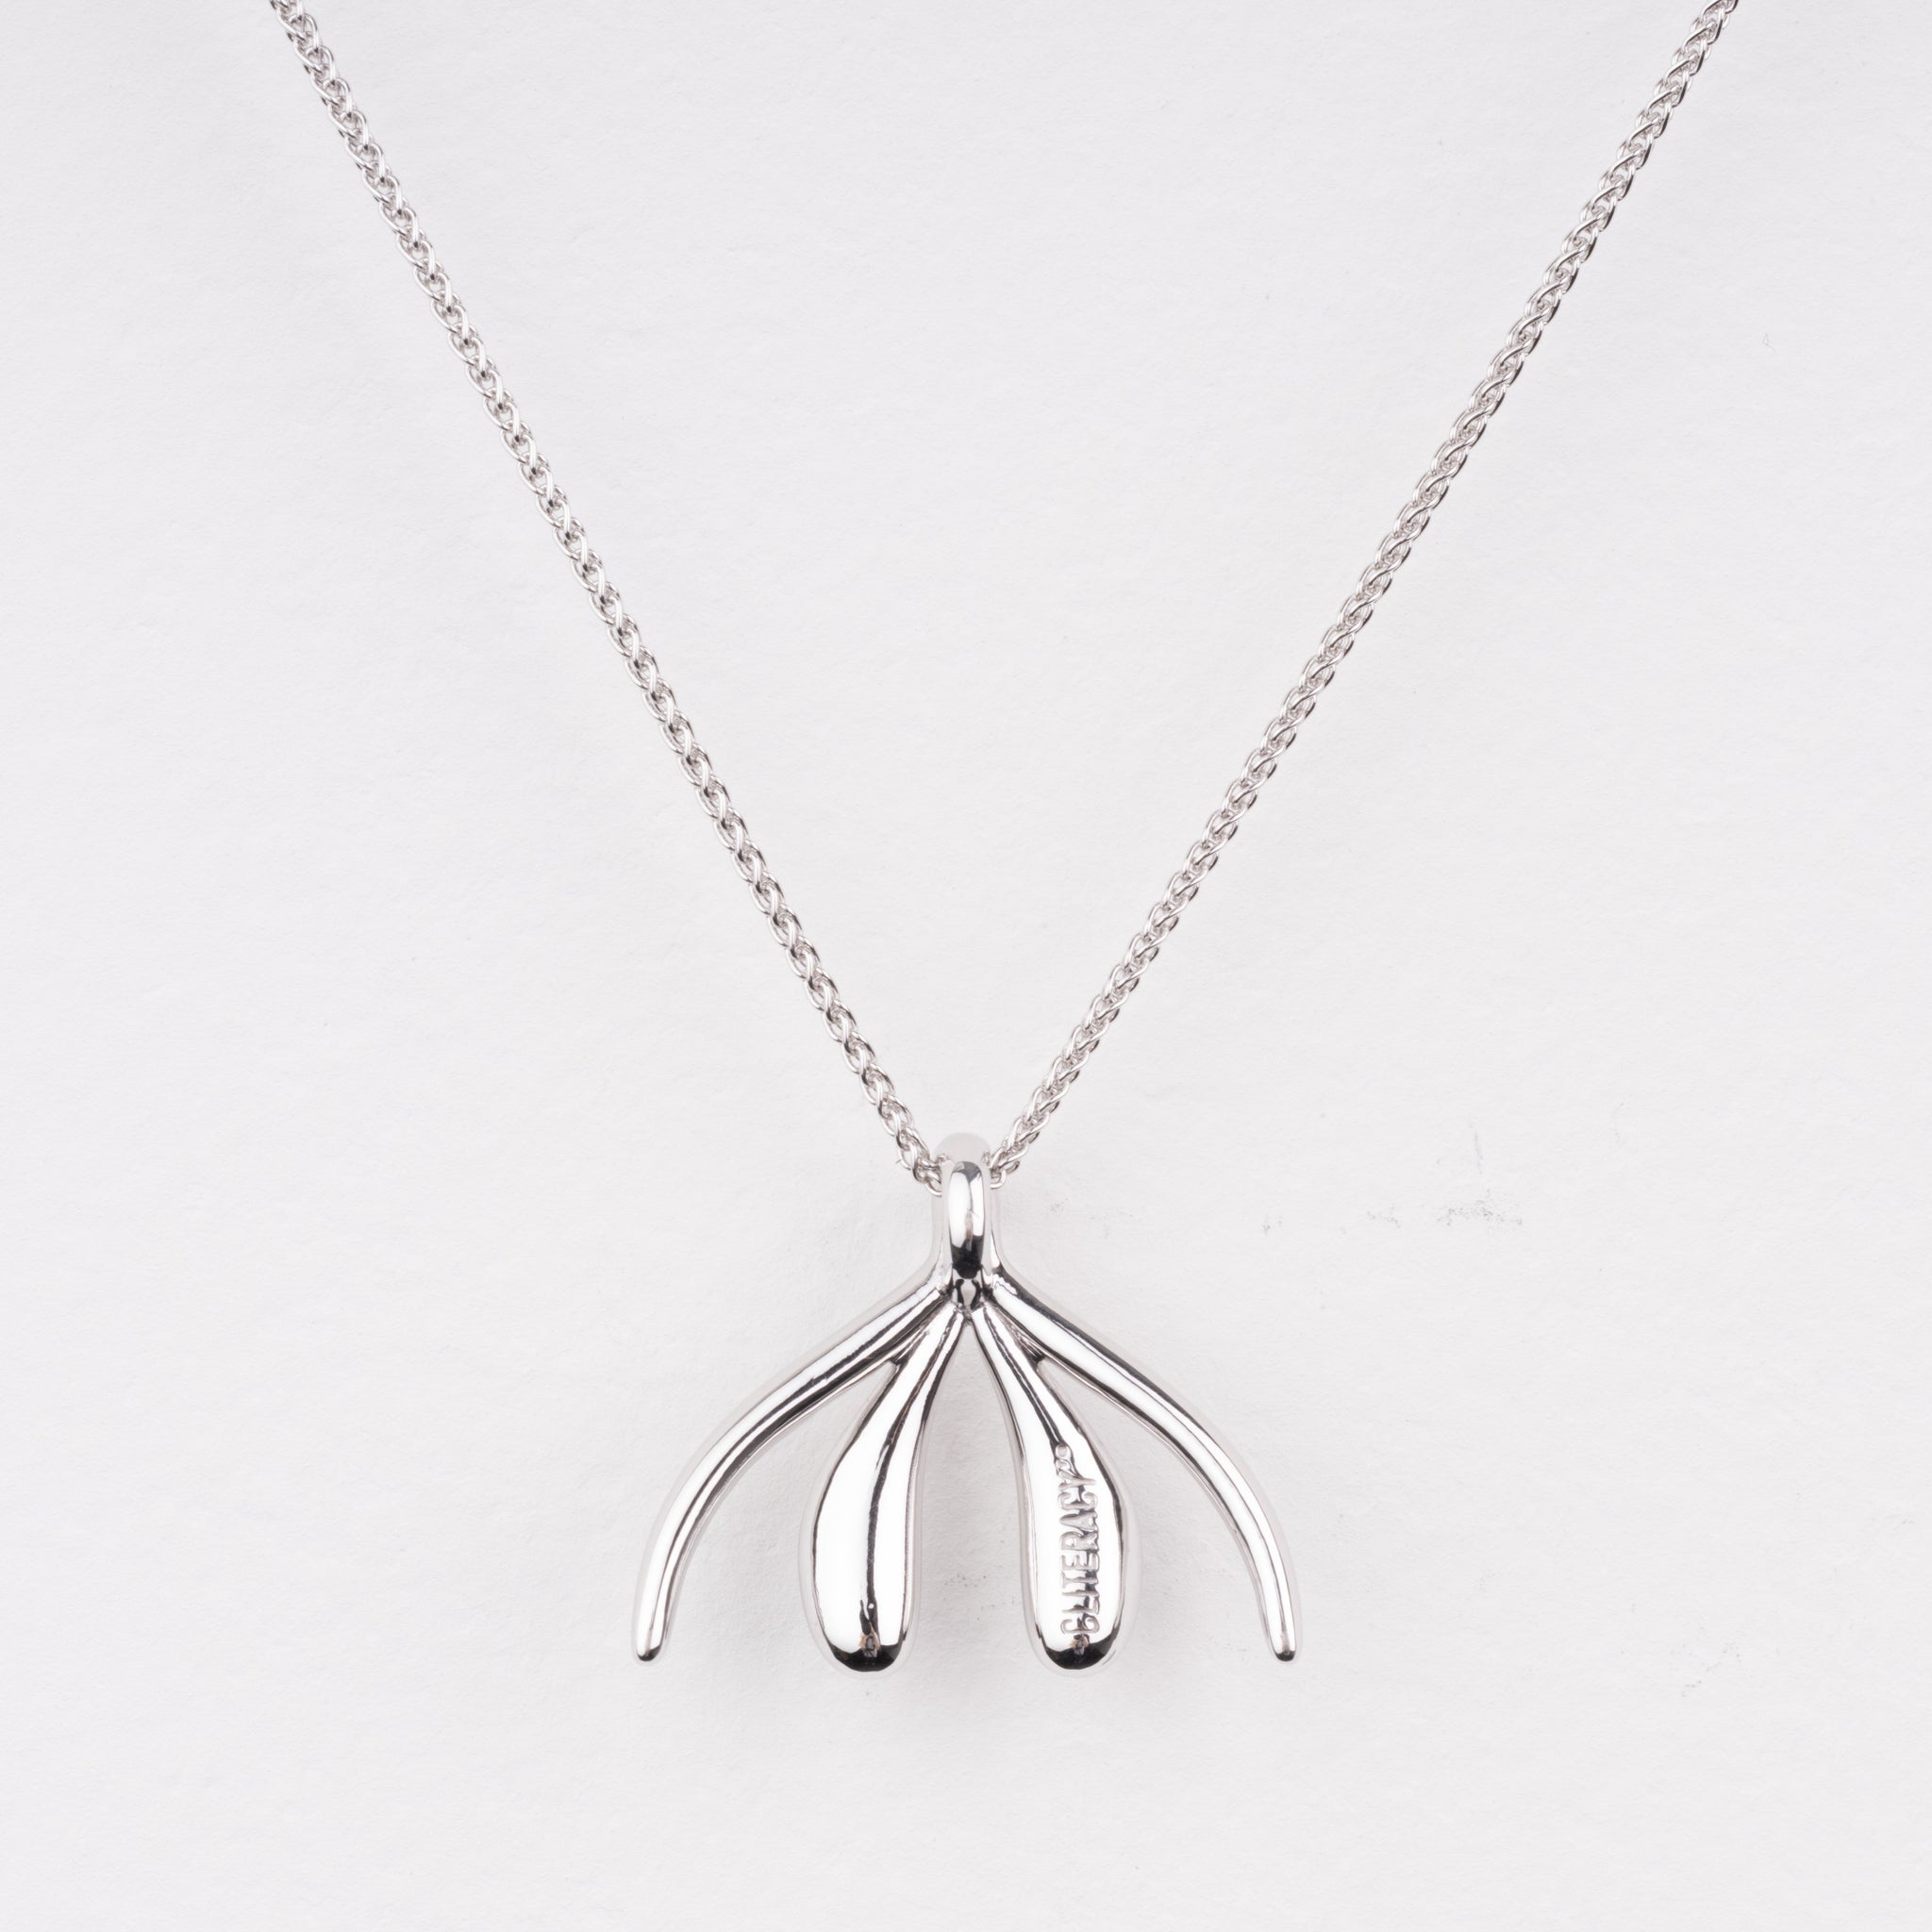 Unconquerable necklace in 14k white gold by Sophia Wallace, view of back of pendent. #cliteracy